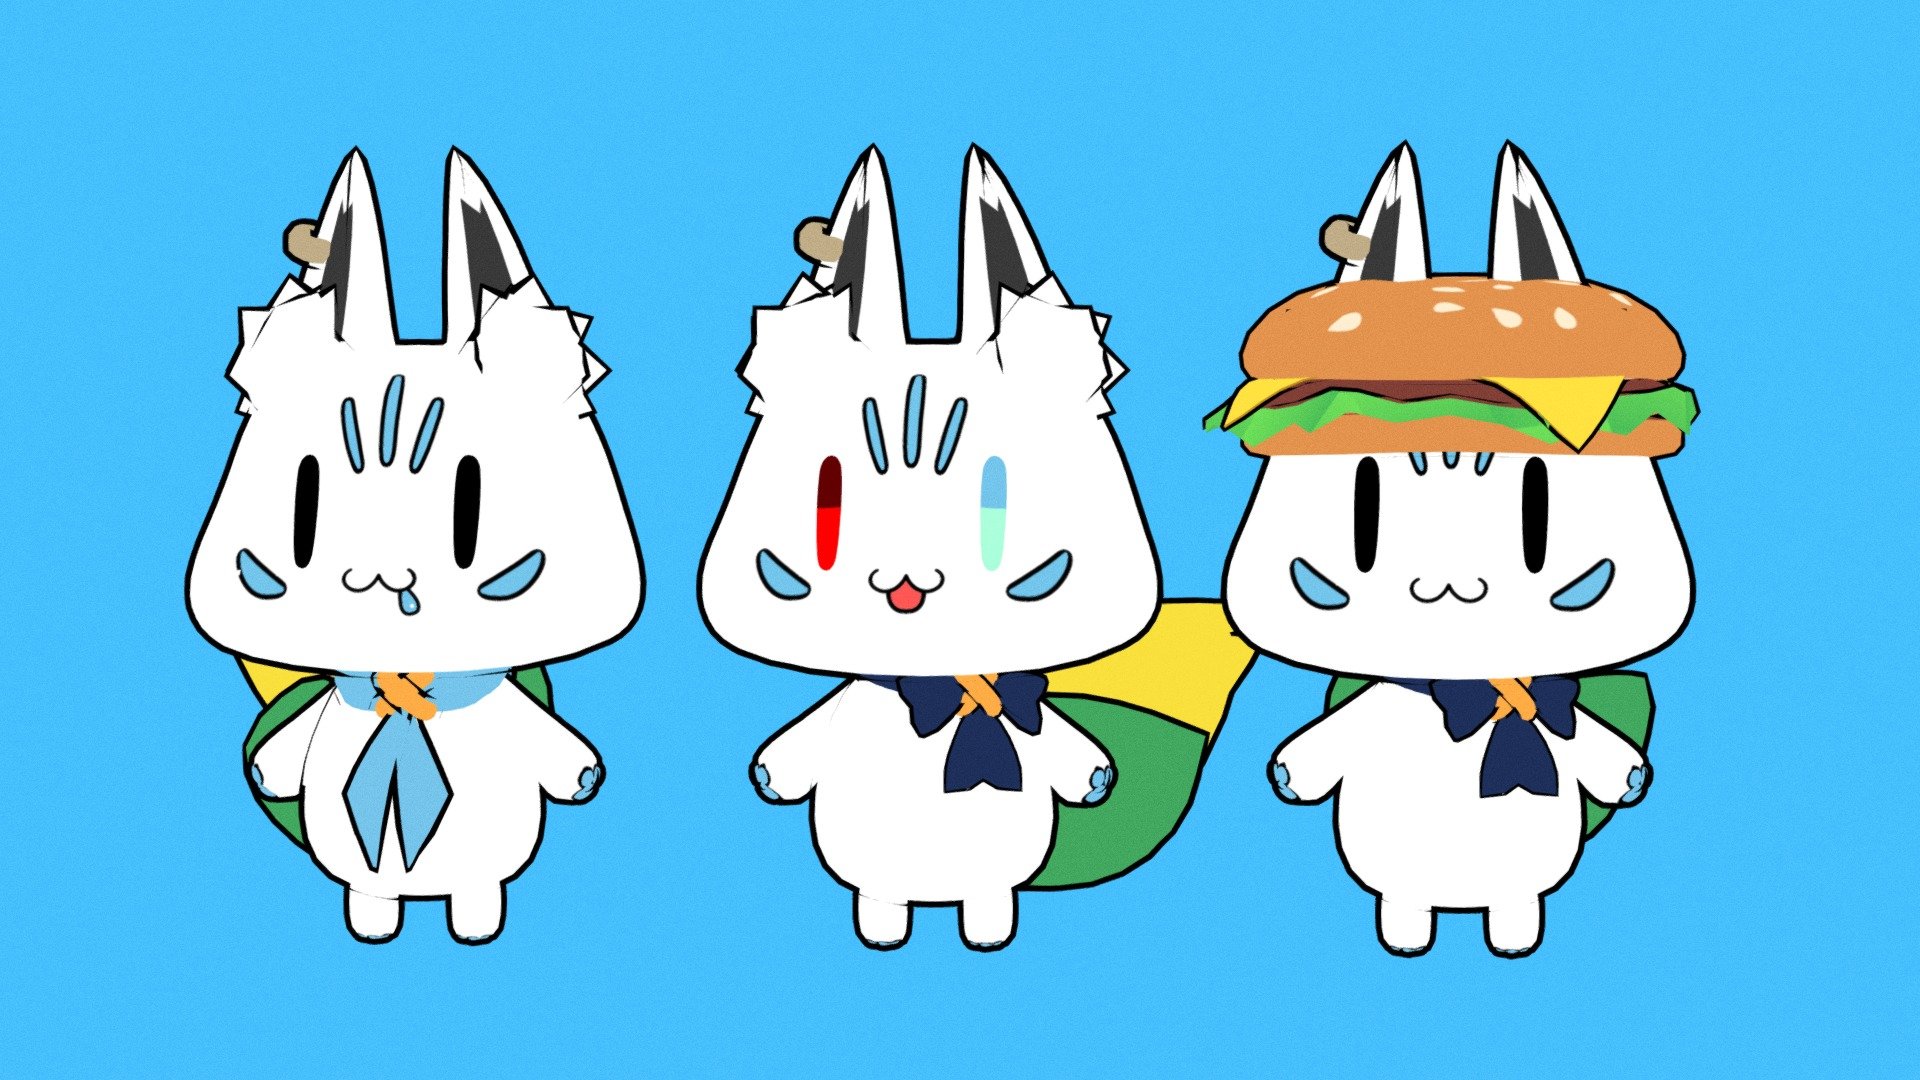 A group of wild すこん部 has appeared!

Supporter mascot of Shirakami Fubuki. concept created by herself as well: https://twitter.com/shirakamifubuki

2 versions(Japan/oversea) available as well as control. You can change eye and mouth by switching UV around.

Due to time constraint, please forgive the somewhat simple/lacking animation, this is however quite a fun experience utilizing different rigging methods.

If you like it please consider following my social media https://twitter.com/ArmoredInterac1 and send me commissions so I don't starve to death, thx!

If you want the original Maya files with controllers just buy random something on my store and send me a message with POB and you may have it 3d model